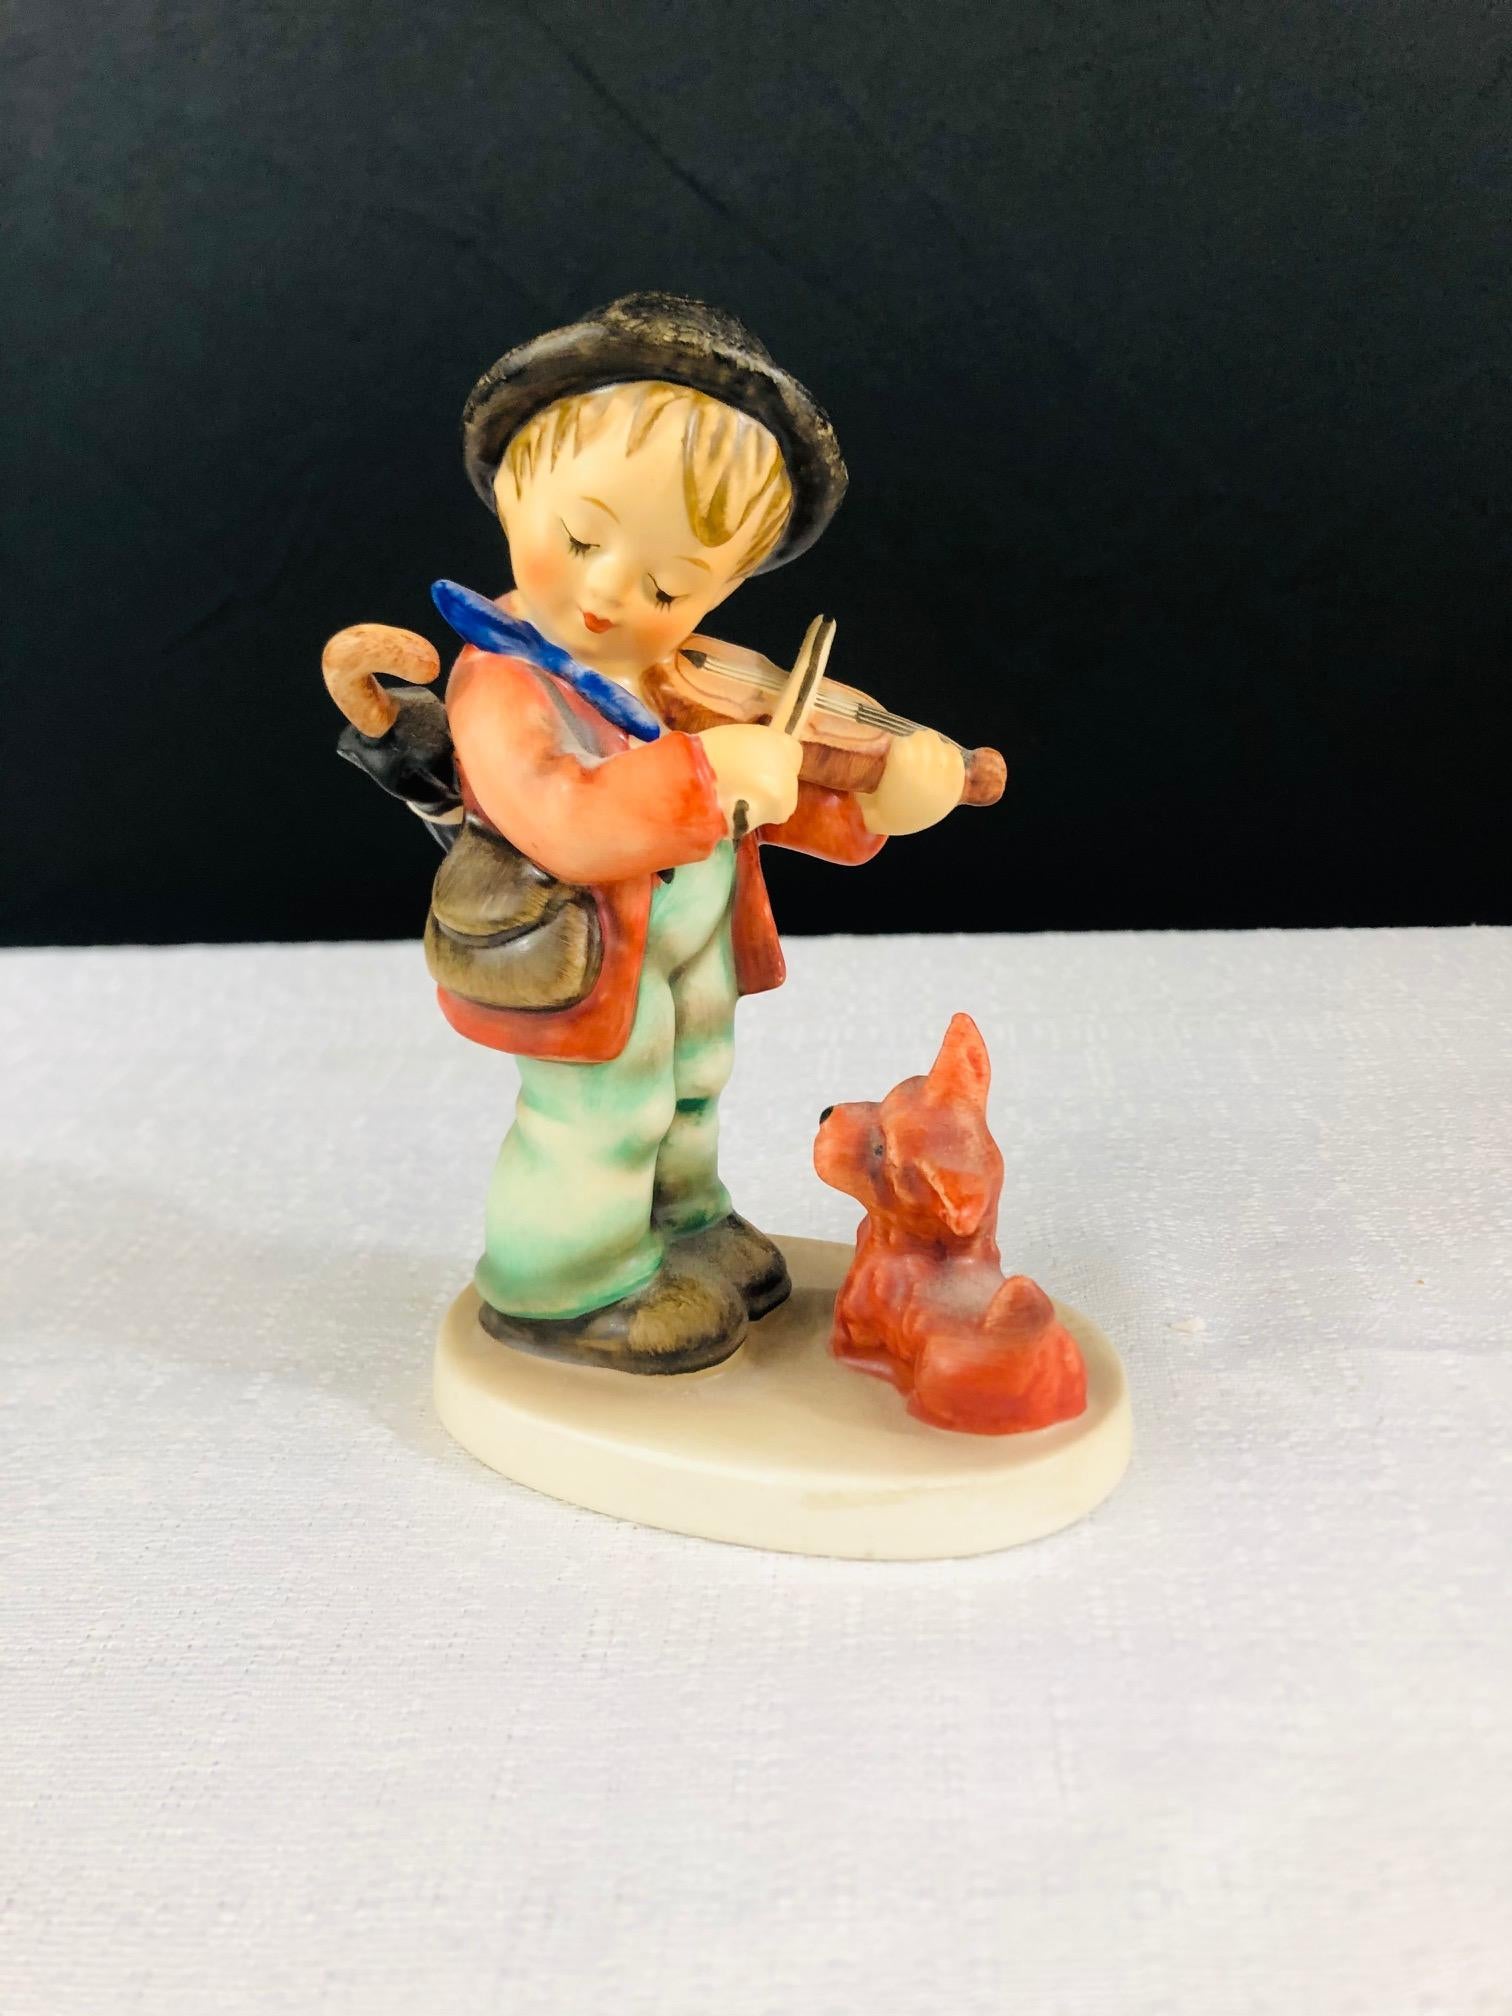 A set of 7 M I Hummel Goebel in fully original condition, Western Germany. Each figurine is stamped Goebel and numbered. Date of manufacturing varies among the figurines.

Pair of boys- 3.25” L x 5.25” H x 2.5” D
Pair of girls- 3.5” L x 4.75” H x